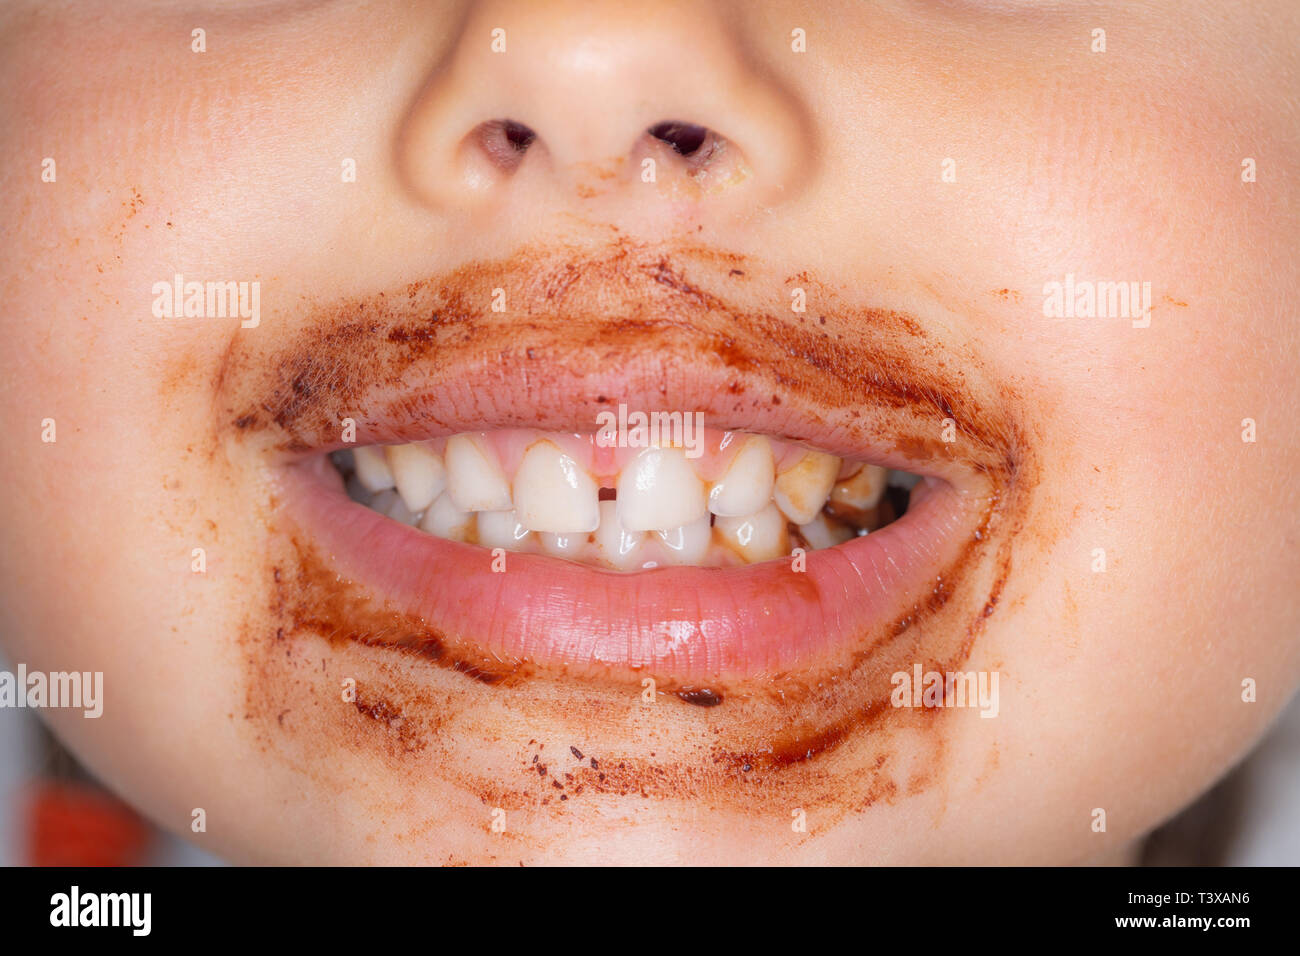 Closeup of young laughing girl eating a chocolate bar with chocolate on her face Stock Photo